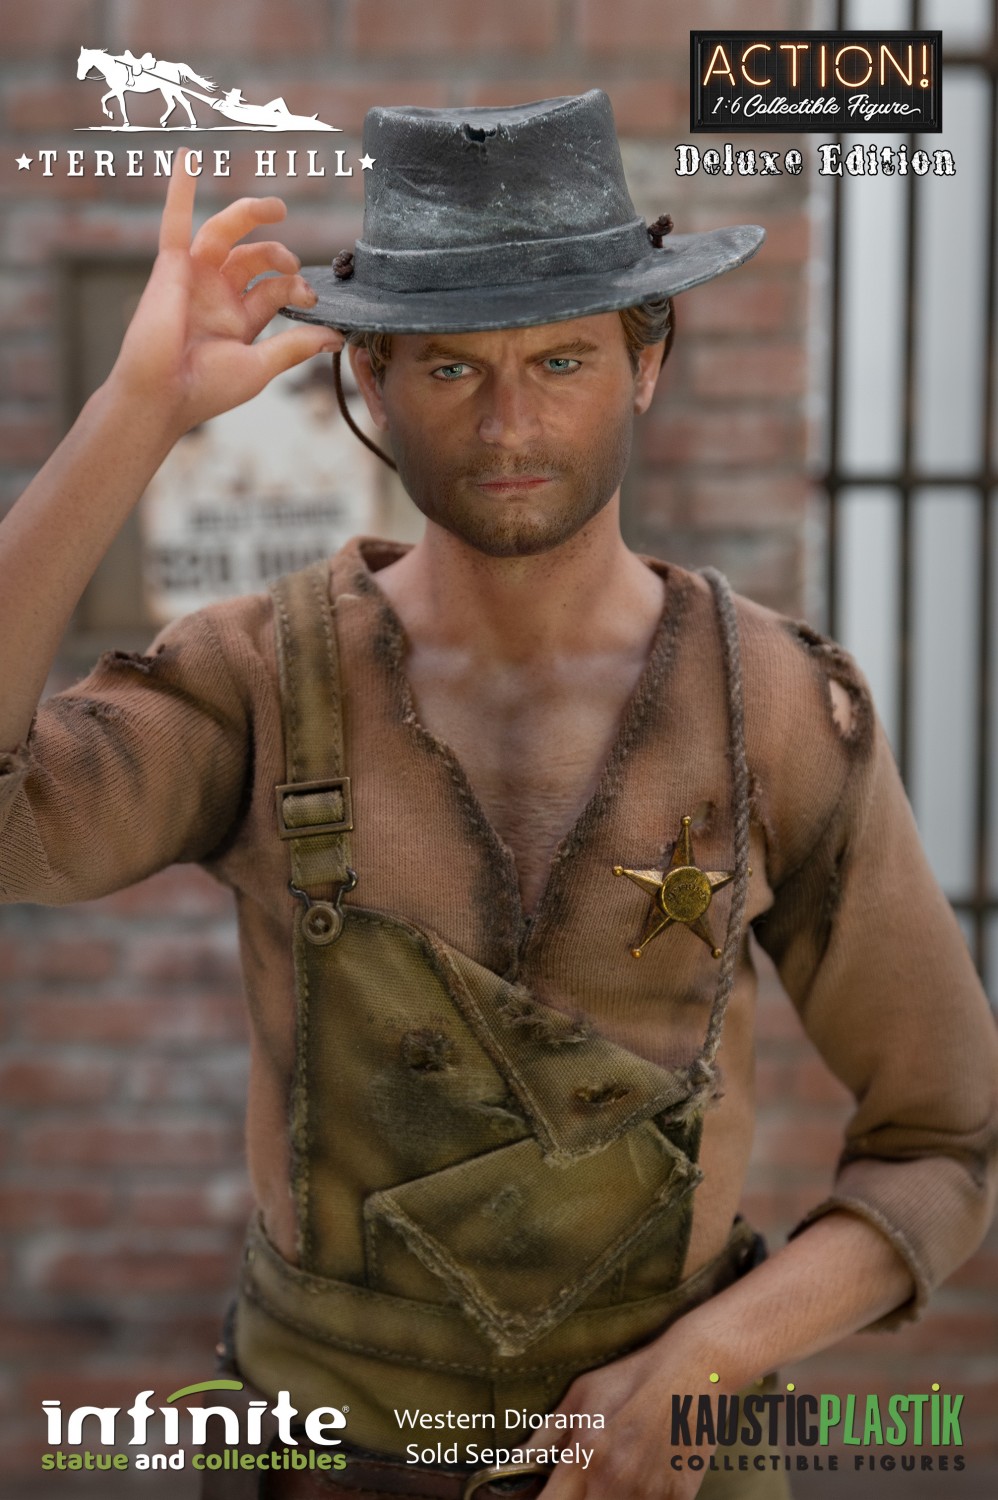 NEW PRODUCT: INFINITE STATUE & KAUSTIC PLASTIK TERENCE HILL 1/6 ACTION - REGULAR, DELUXE, EXCLUSIVE, DIORAMA Terence-hill-16-deluxe-edition-